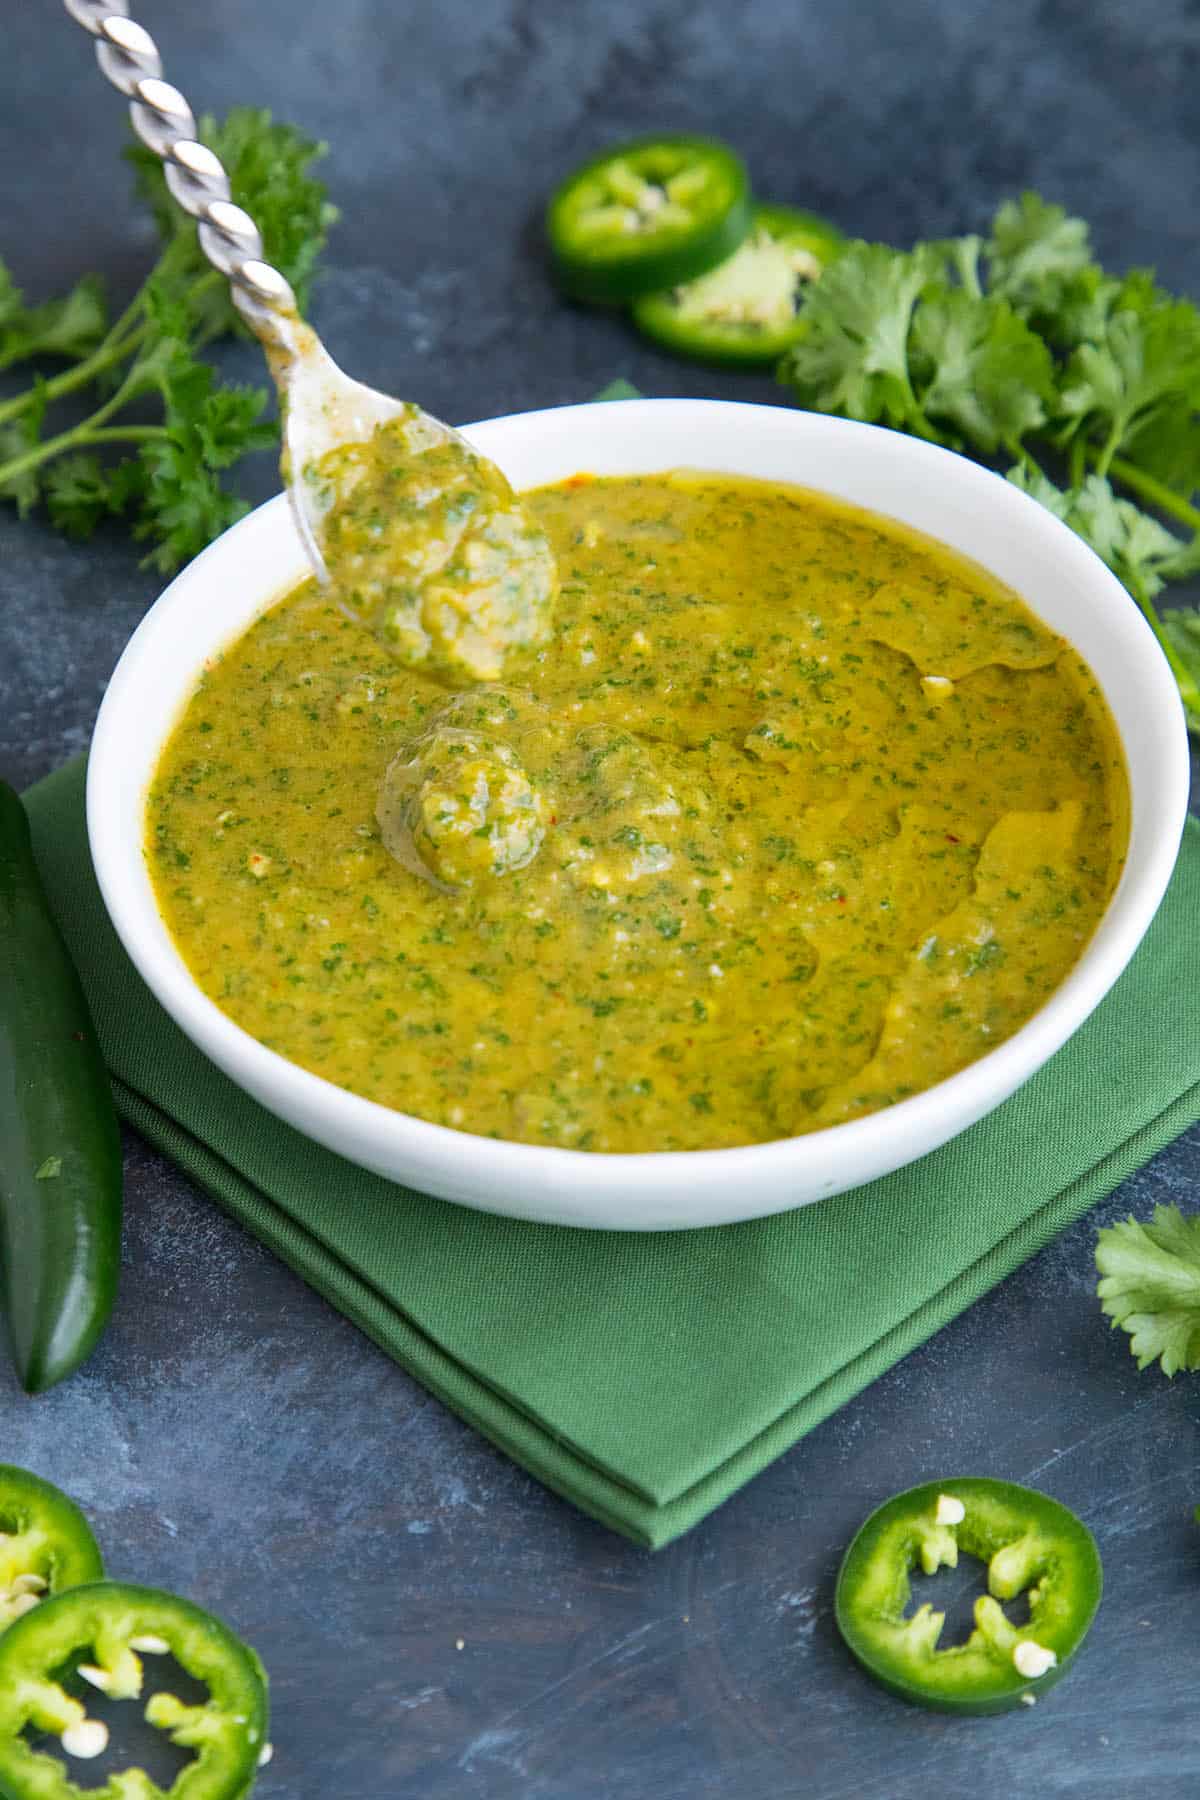 Chermoula Recipe - A great marinade or herbed sauce